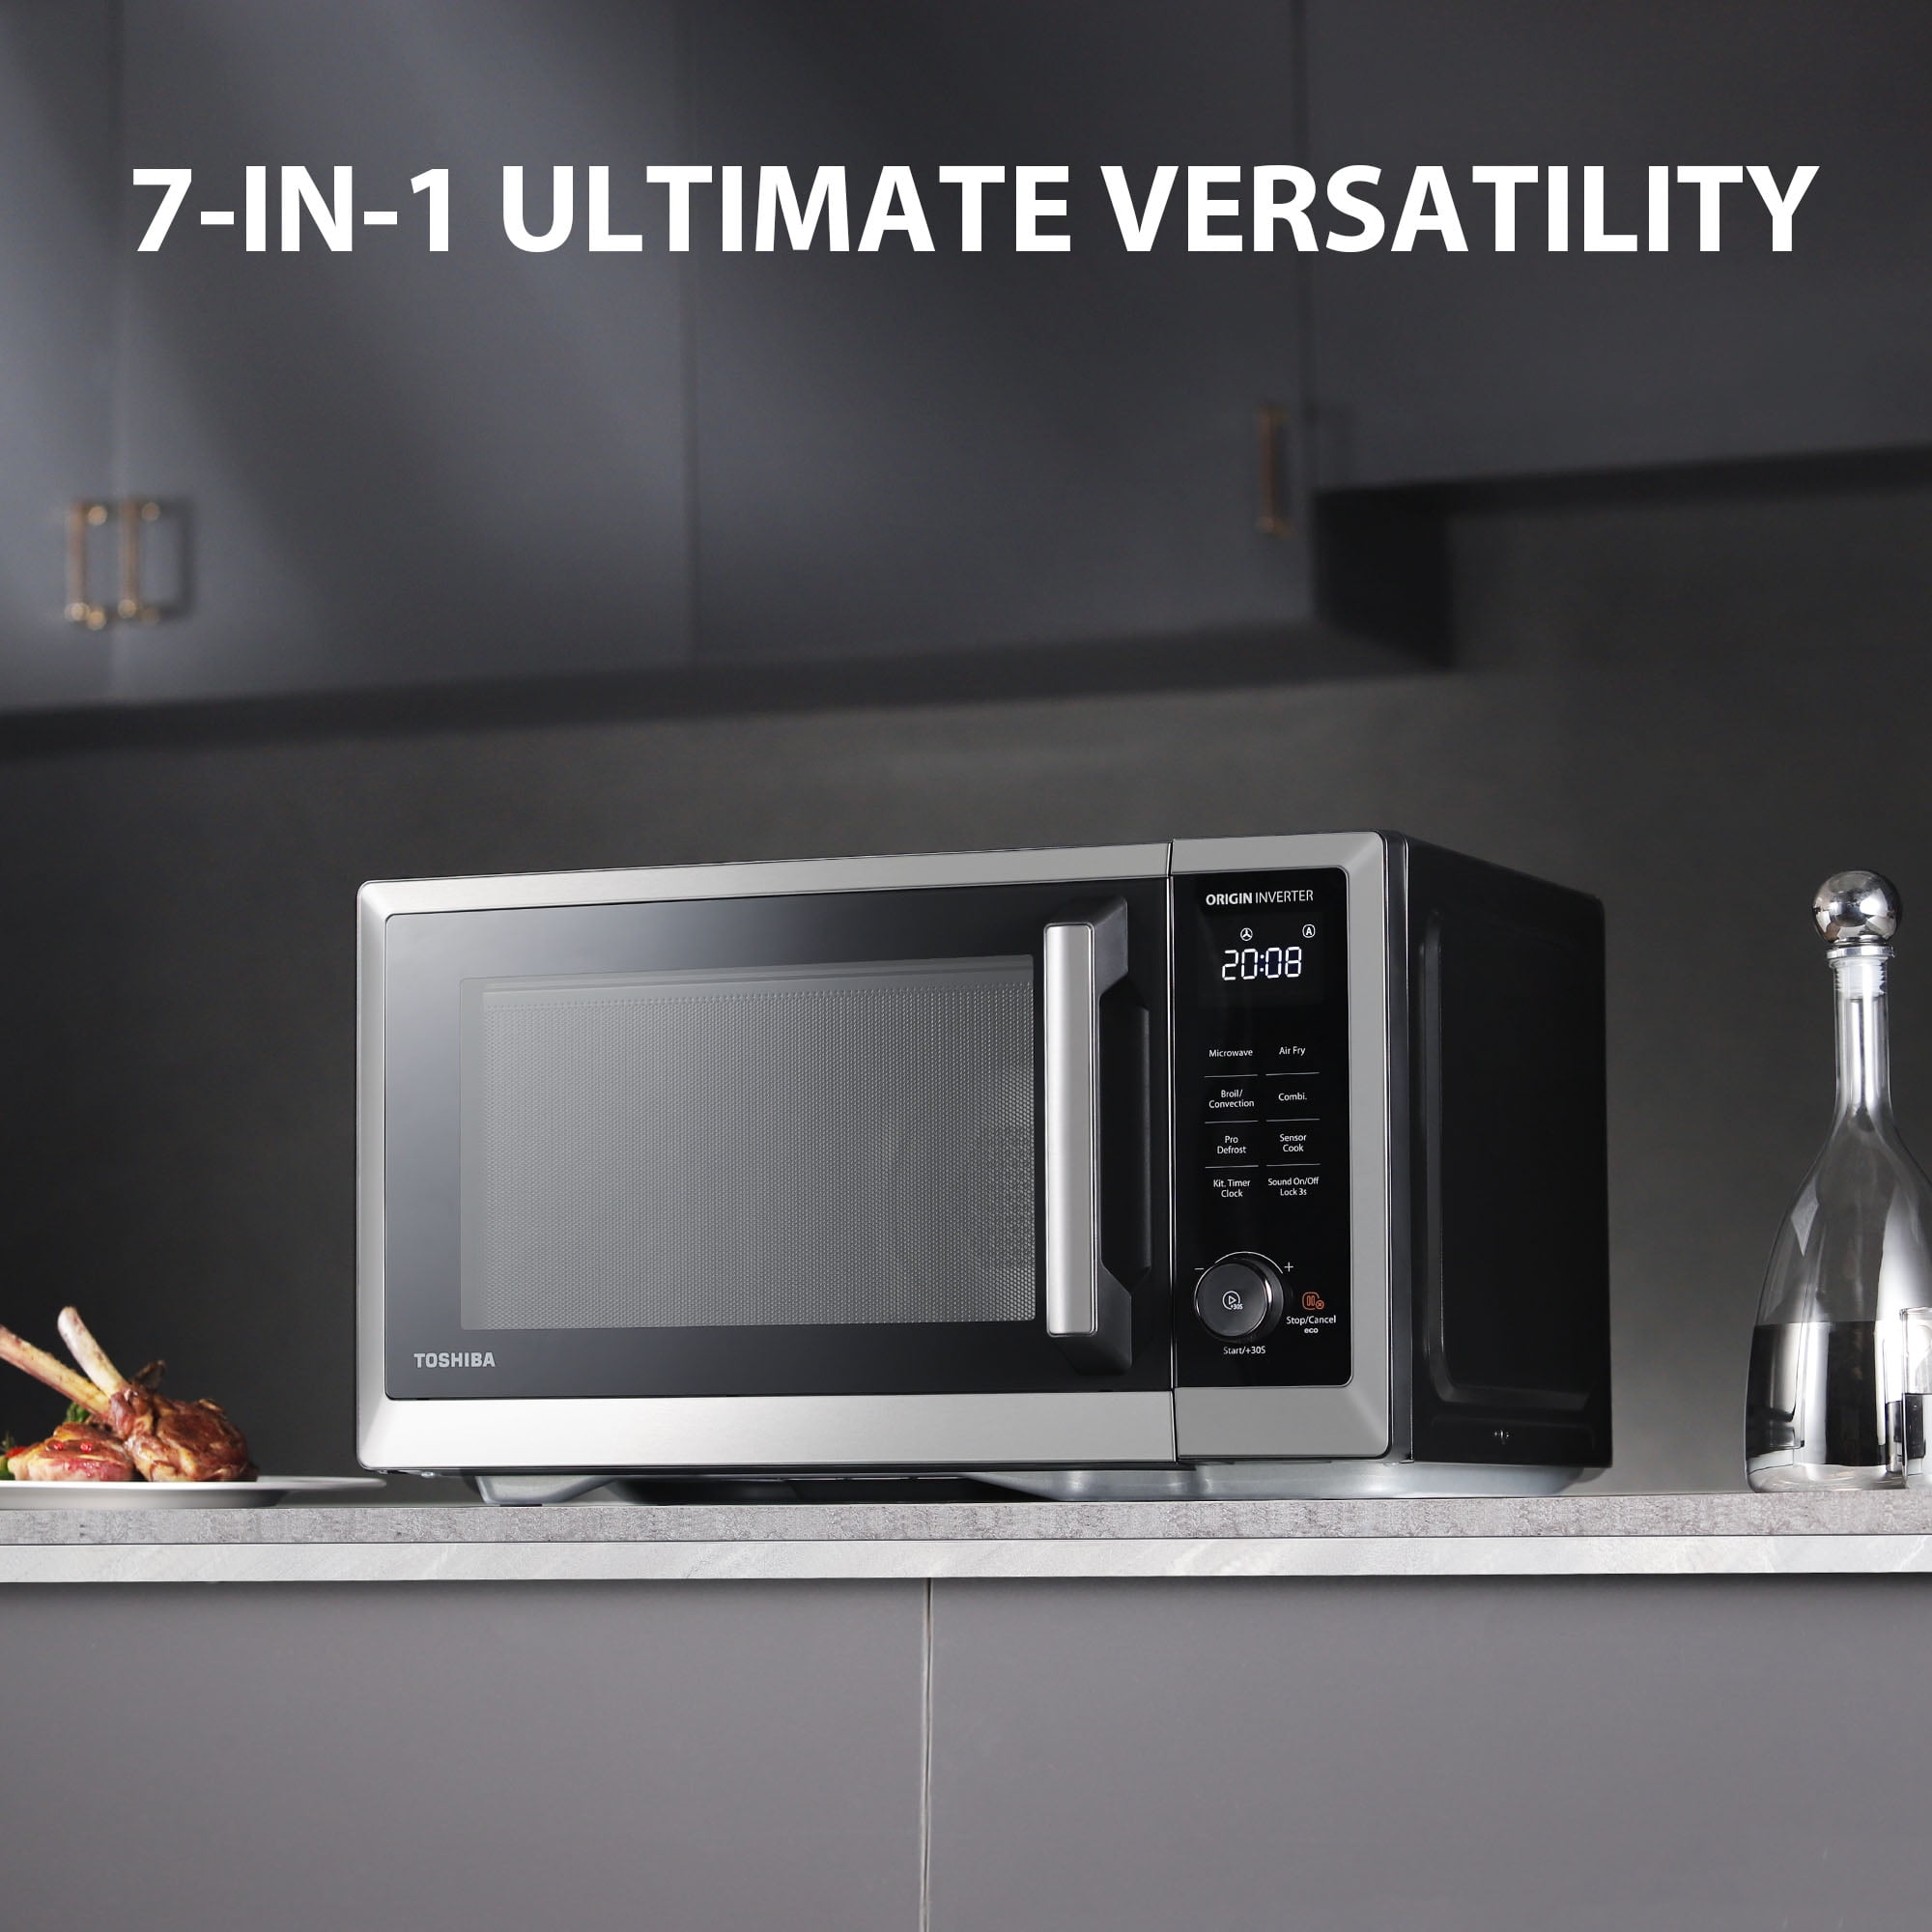 TOSHIBA 6-in-1 Inverter Microwave Oven Air Fryer Combo, MASTER Series  Countertop Microwave, Air Fryer, Broil, Convection, Speedy Combi, Even  Defrost